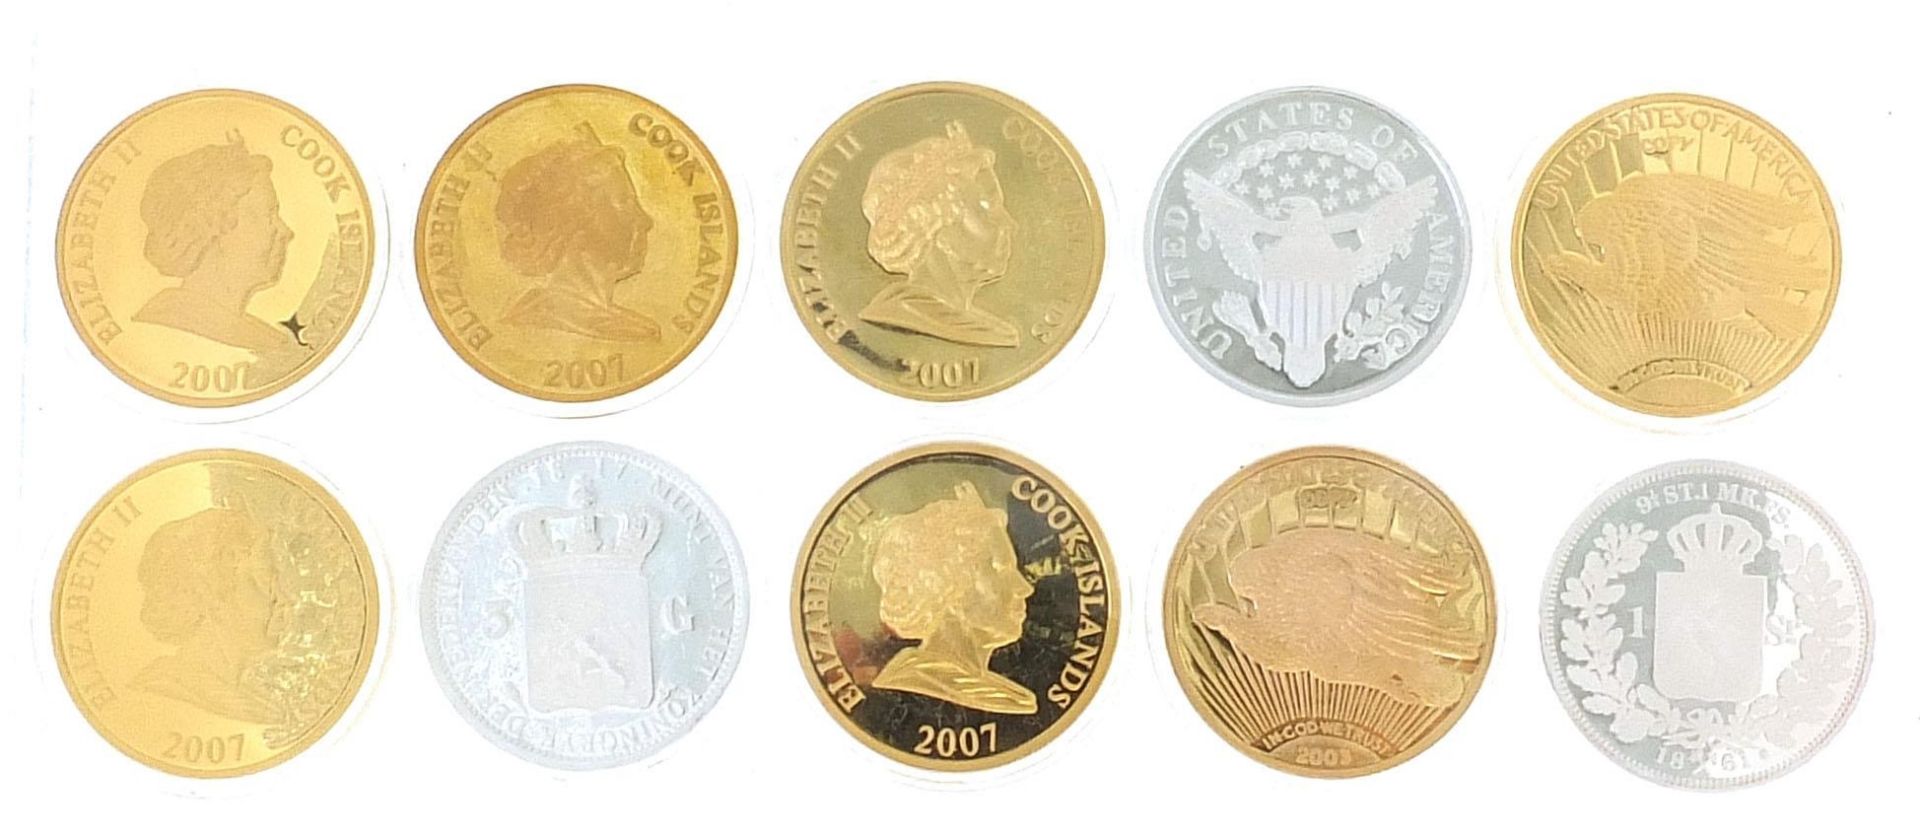 Ten commemorative coins depicting American eagle, Queen Elizabeth II and others - Image 4 of 4